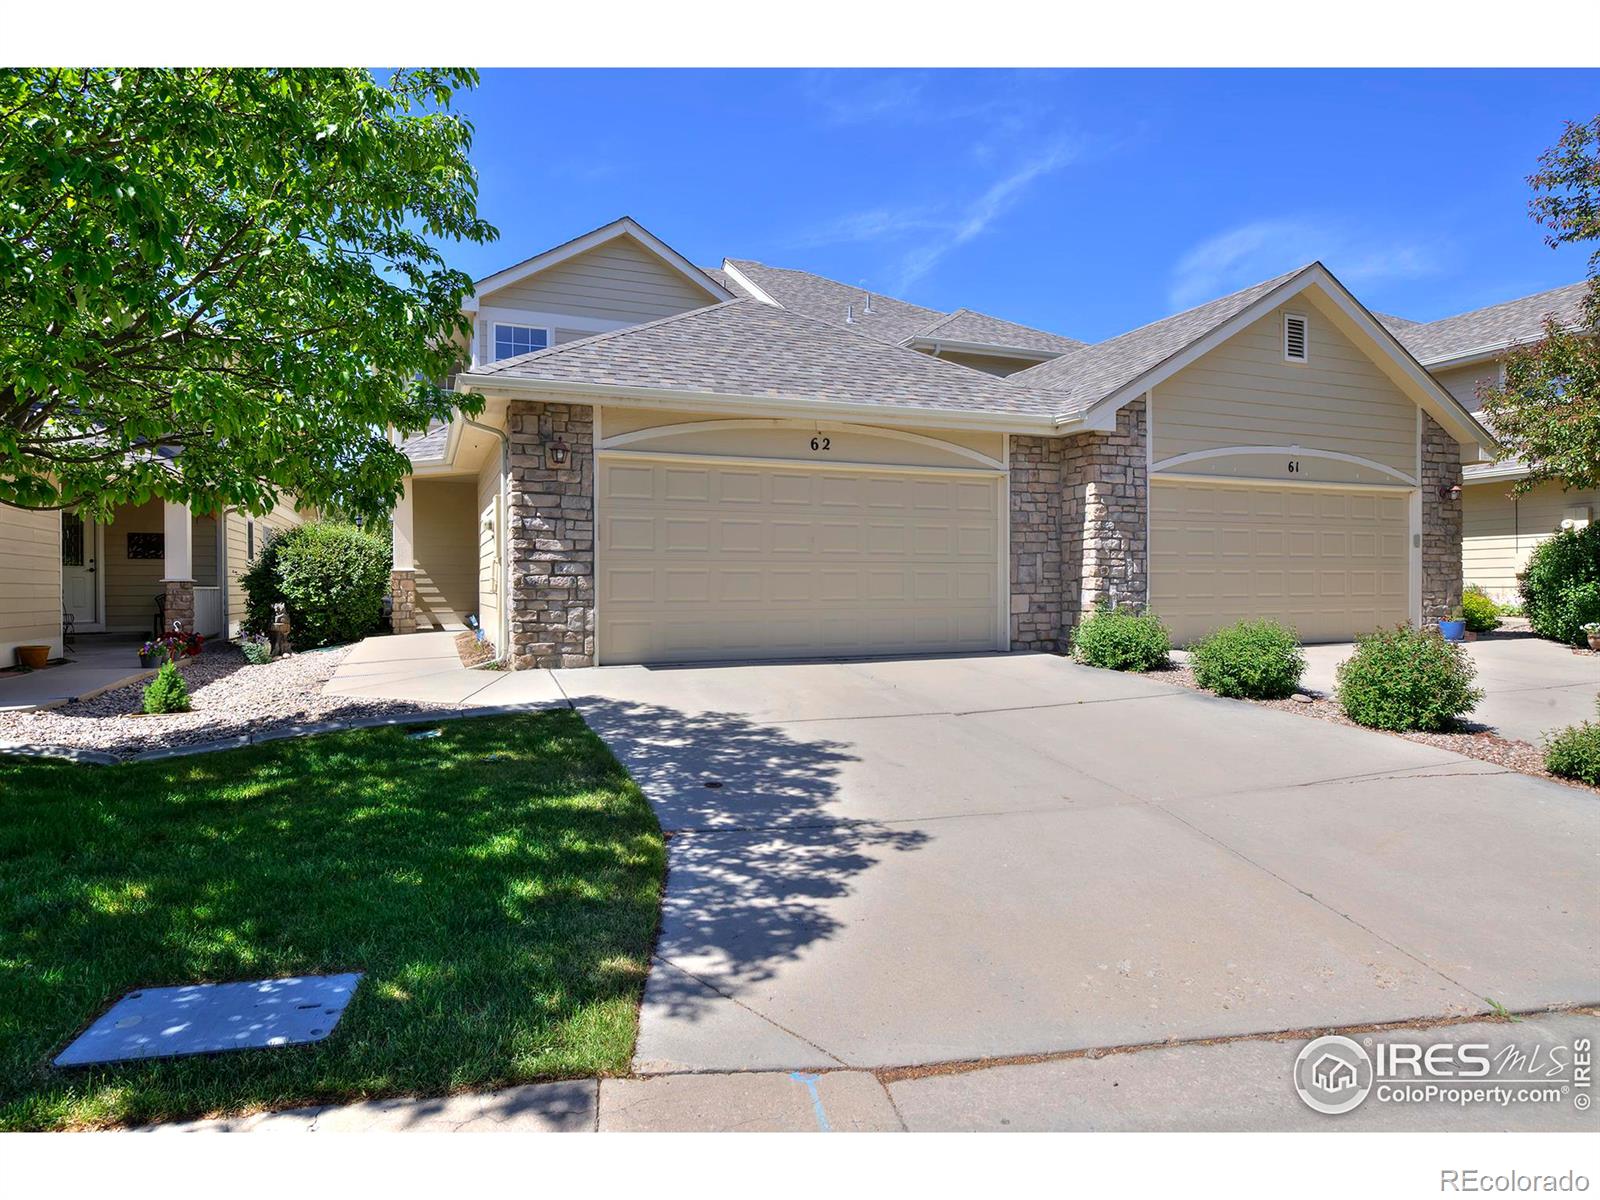 Report Image for 3500  Swanstone Drive,Fort Collins, Colorado